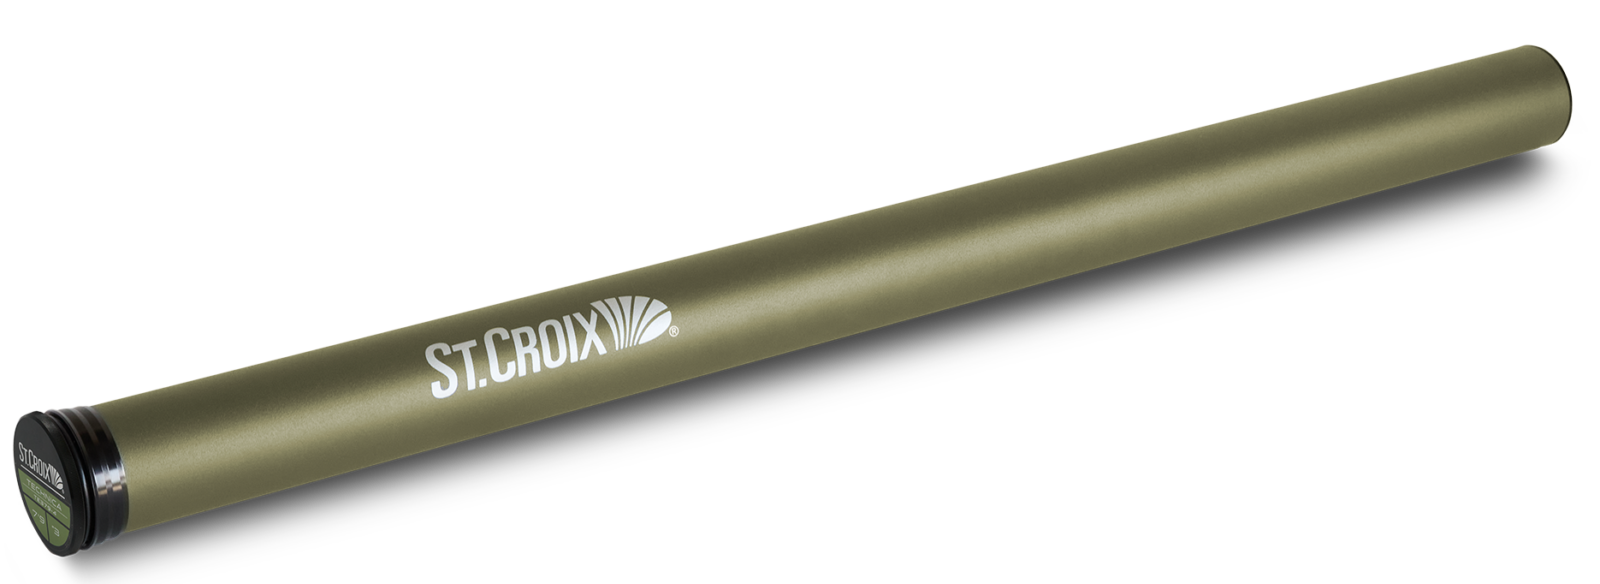 St. Croix Launches New TECHNICA Series of Fly Rods